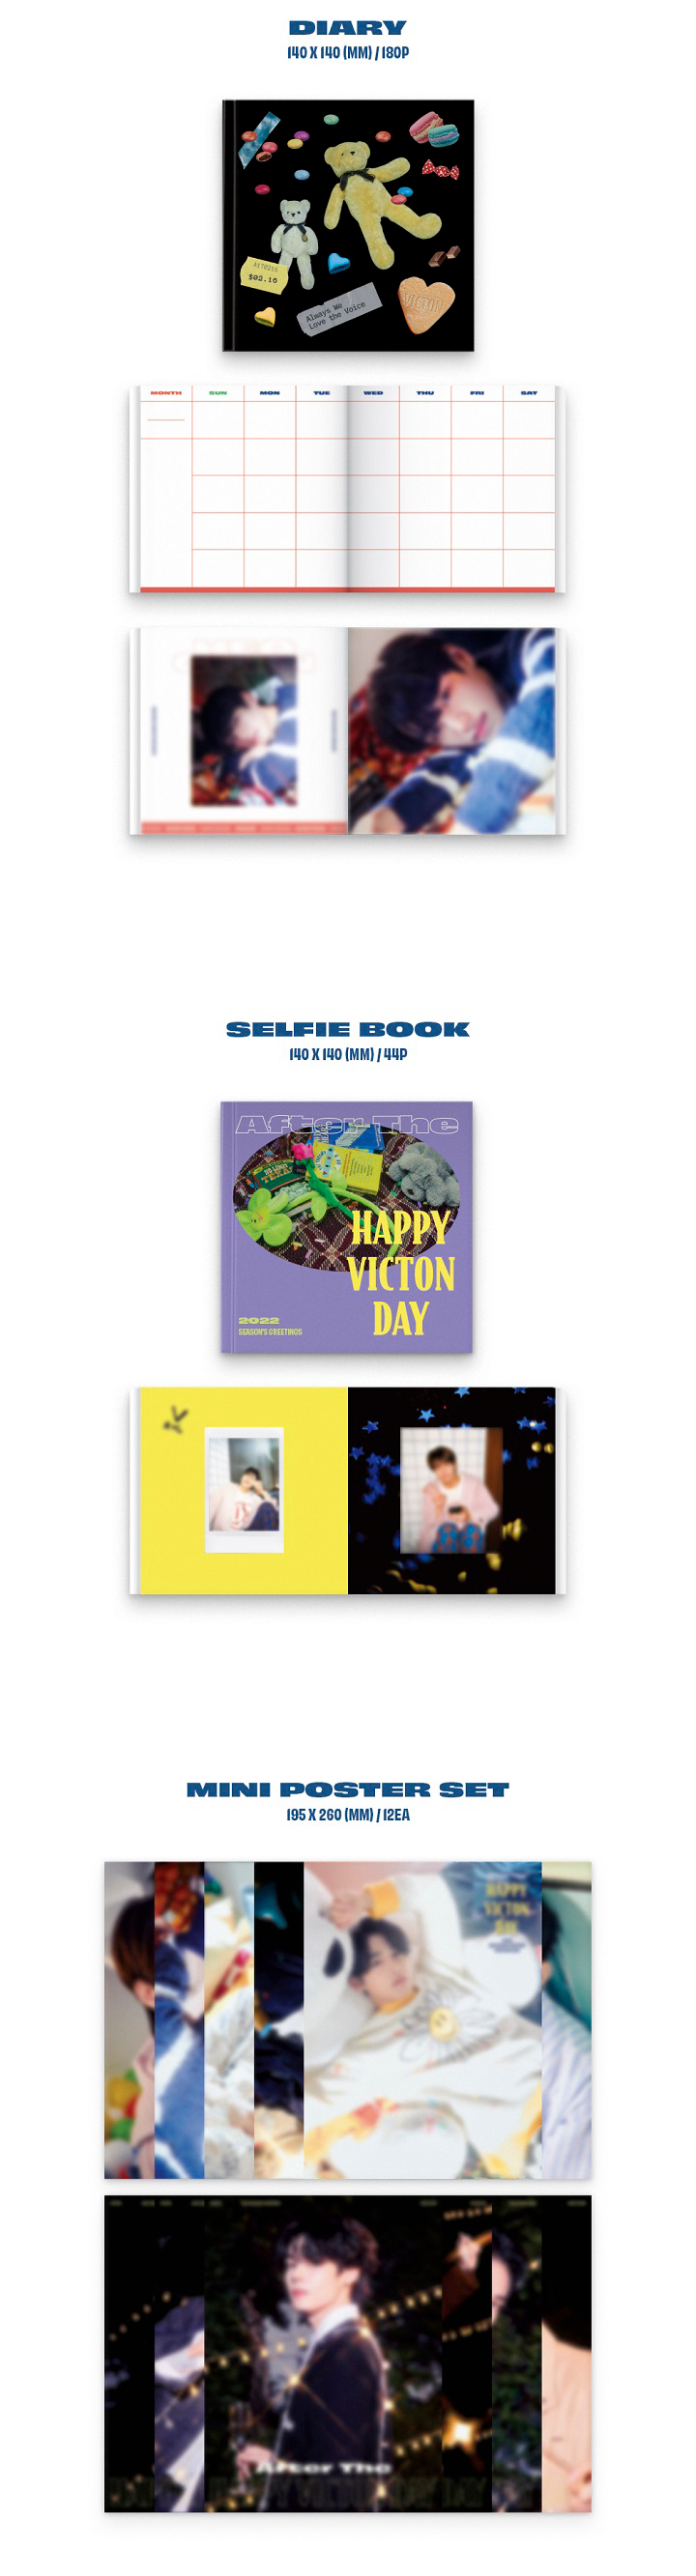 VICTON - [AFTER THE HAPPY VICTON DAY] 2022 SEASON'S GREETINGS